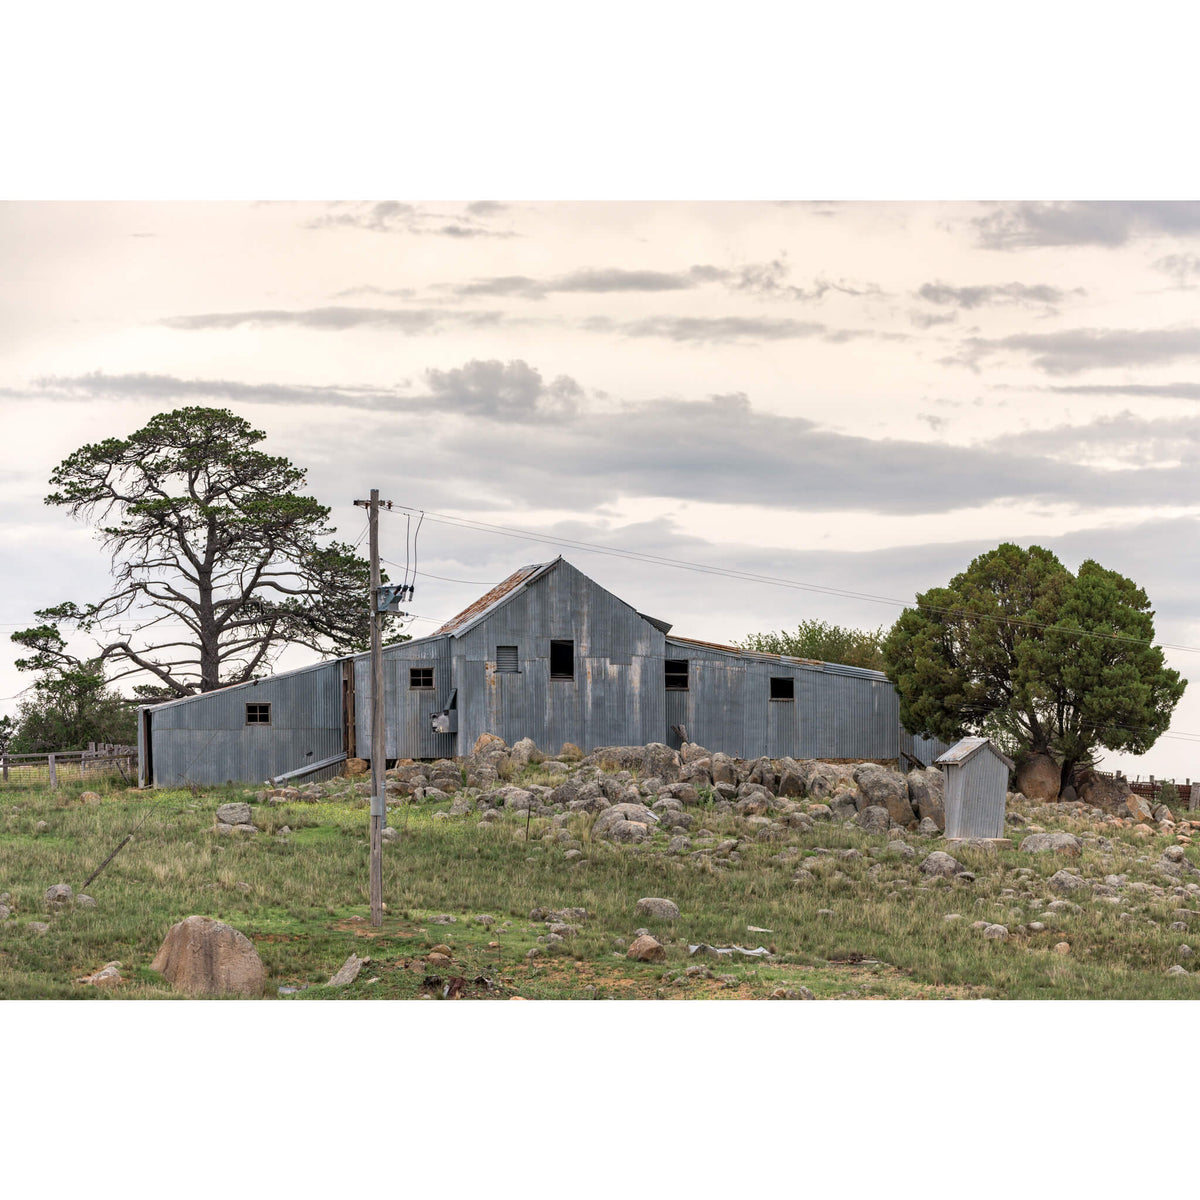 Numbla Vale Woolshed | The Woolshed Fine Art Print - Lost Collective Shop